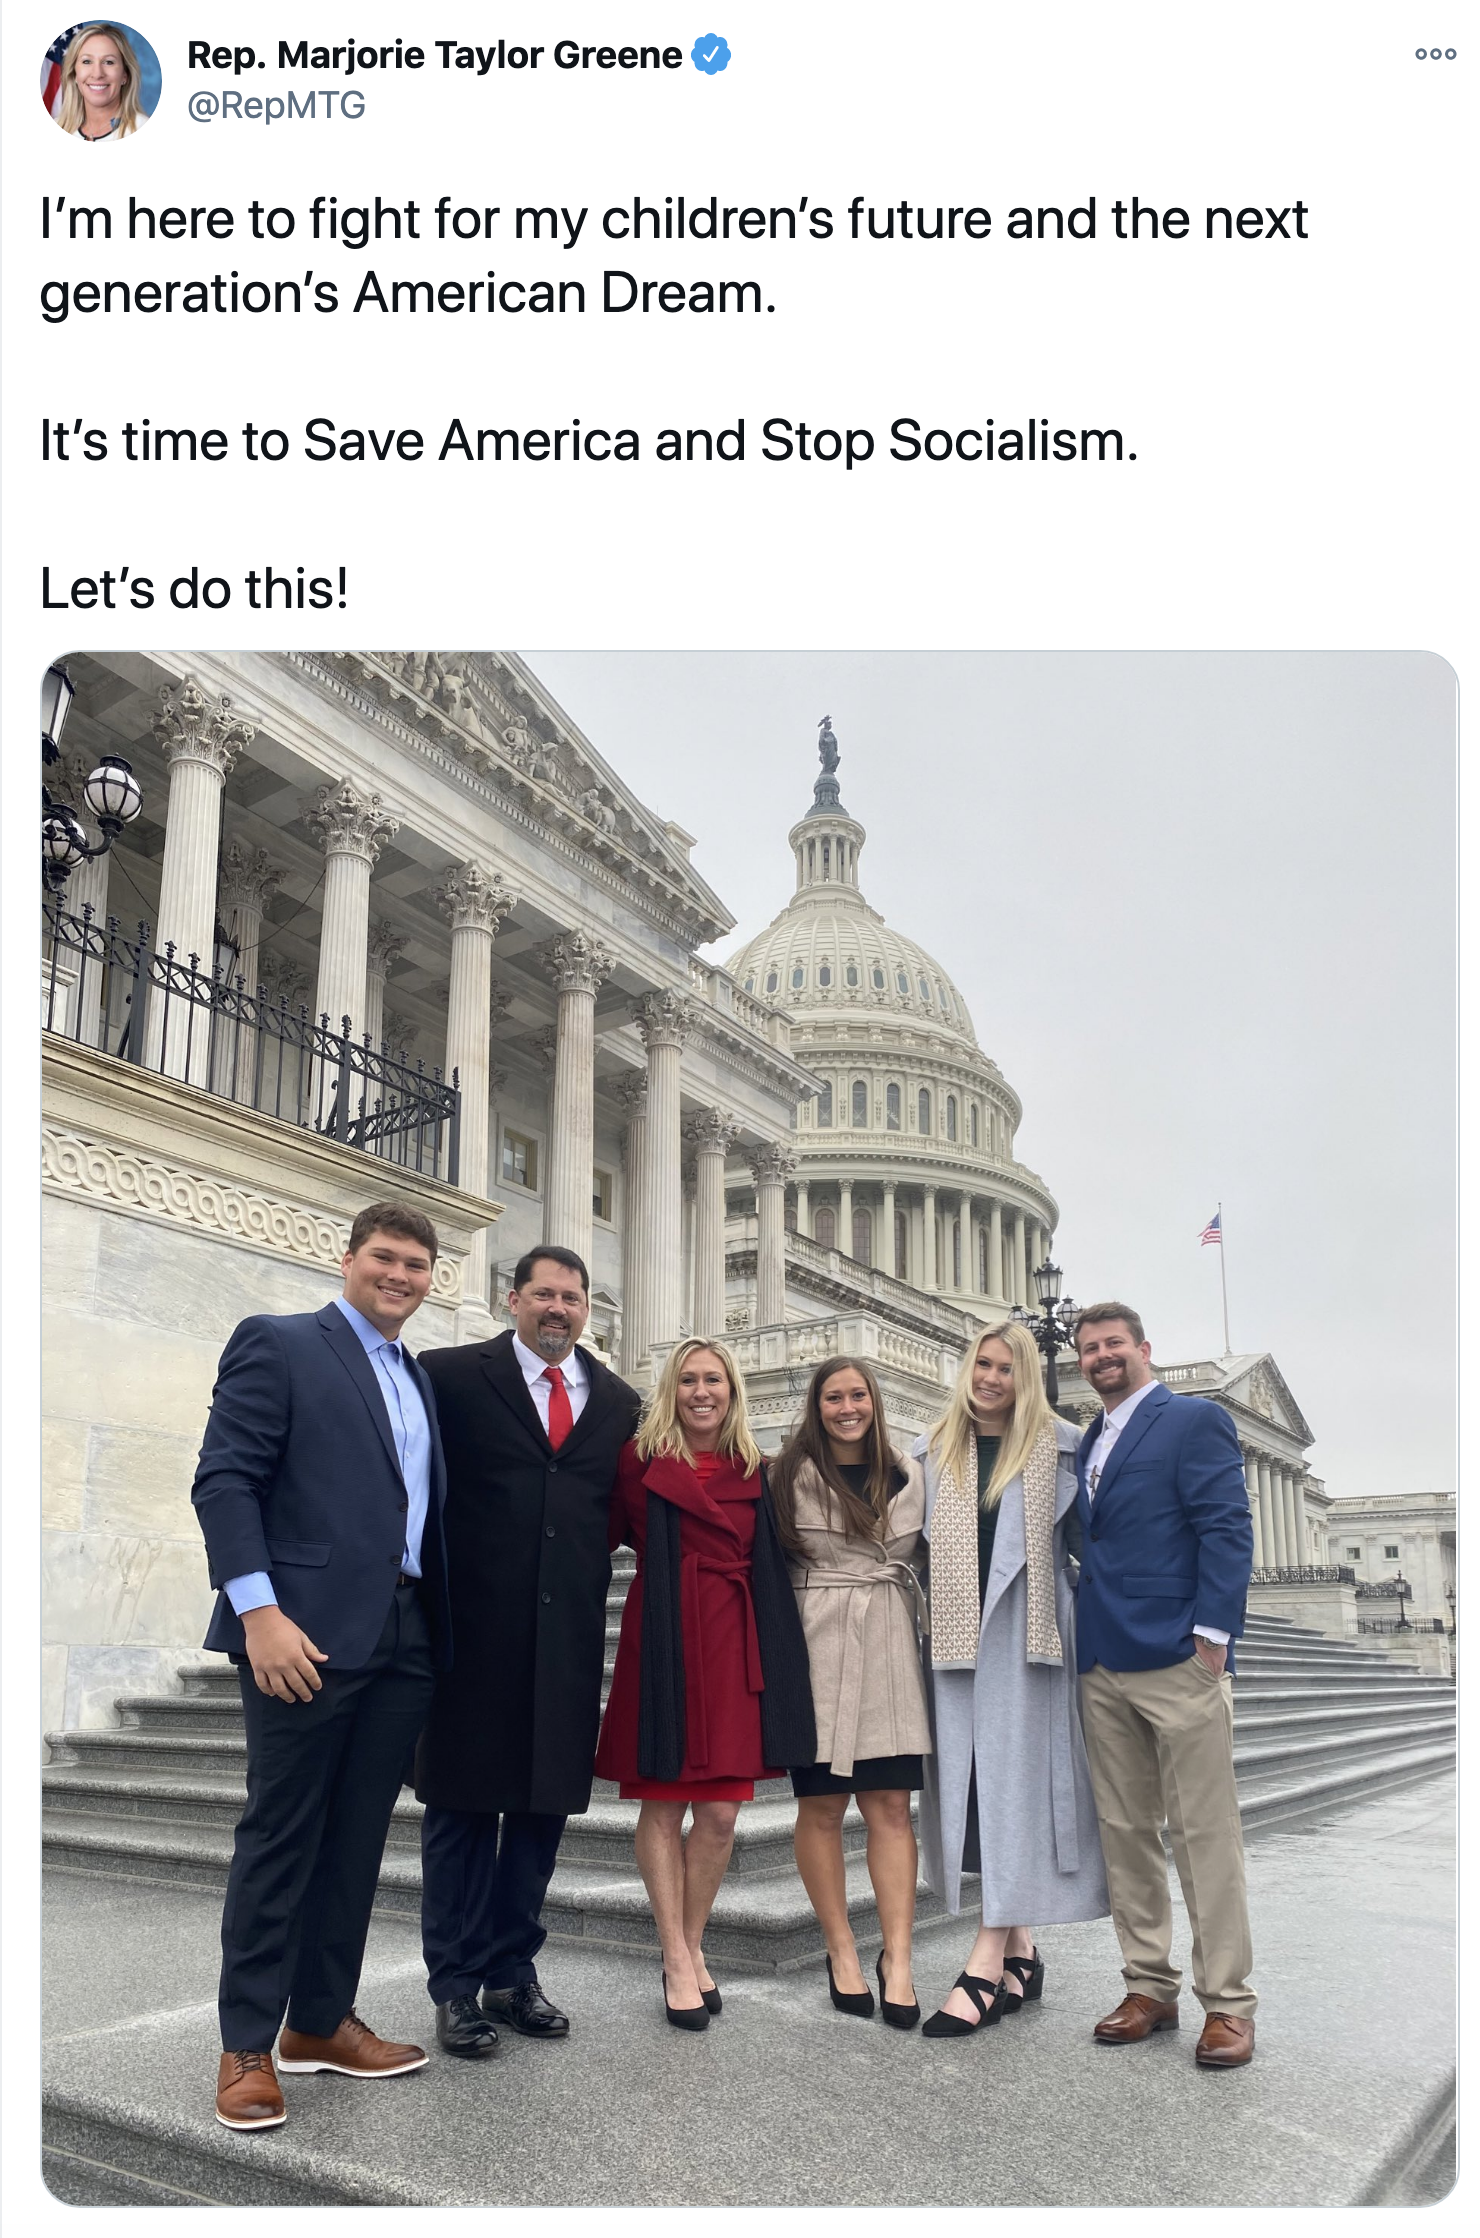 Screen-Shot-2021-01-03-at-2.00.25-PM GOP Congresswoman Kicked Off House Floor For Safety Violation Conspiracy Theory Featured Politics Top Stories Twitter 